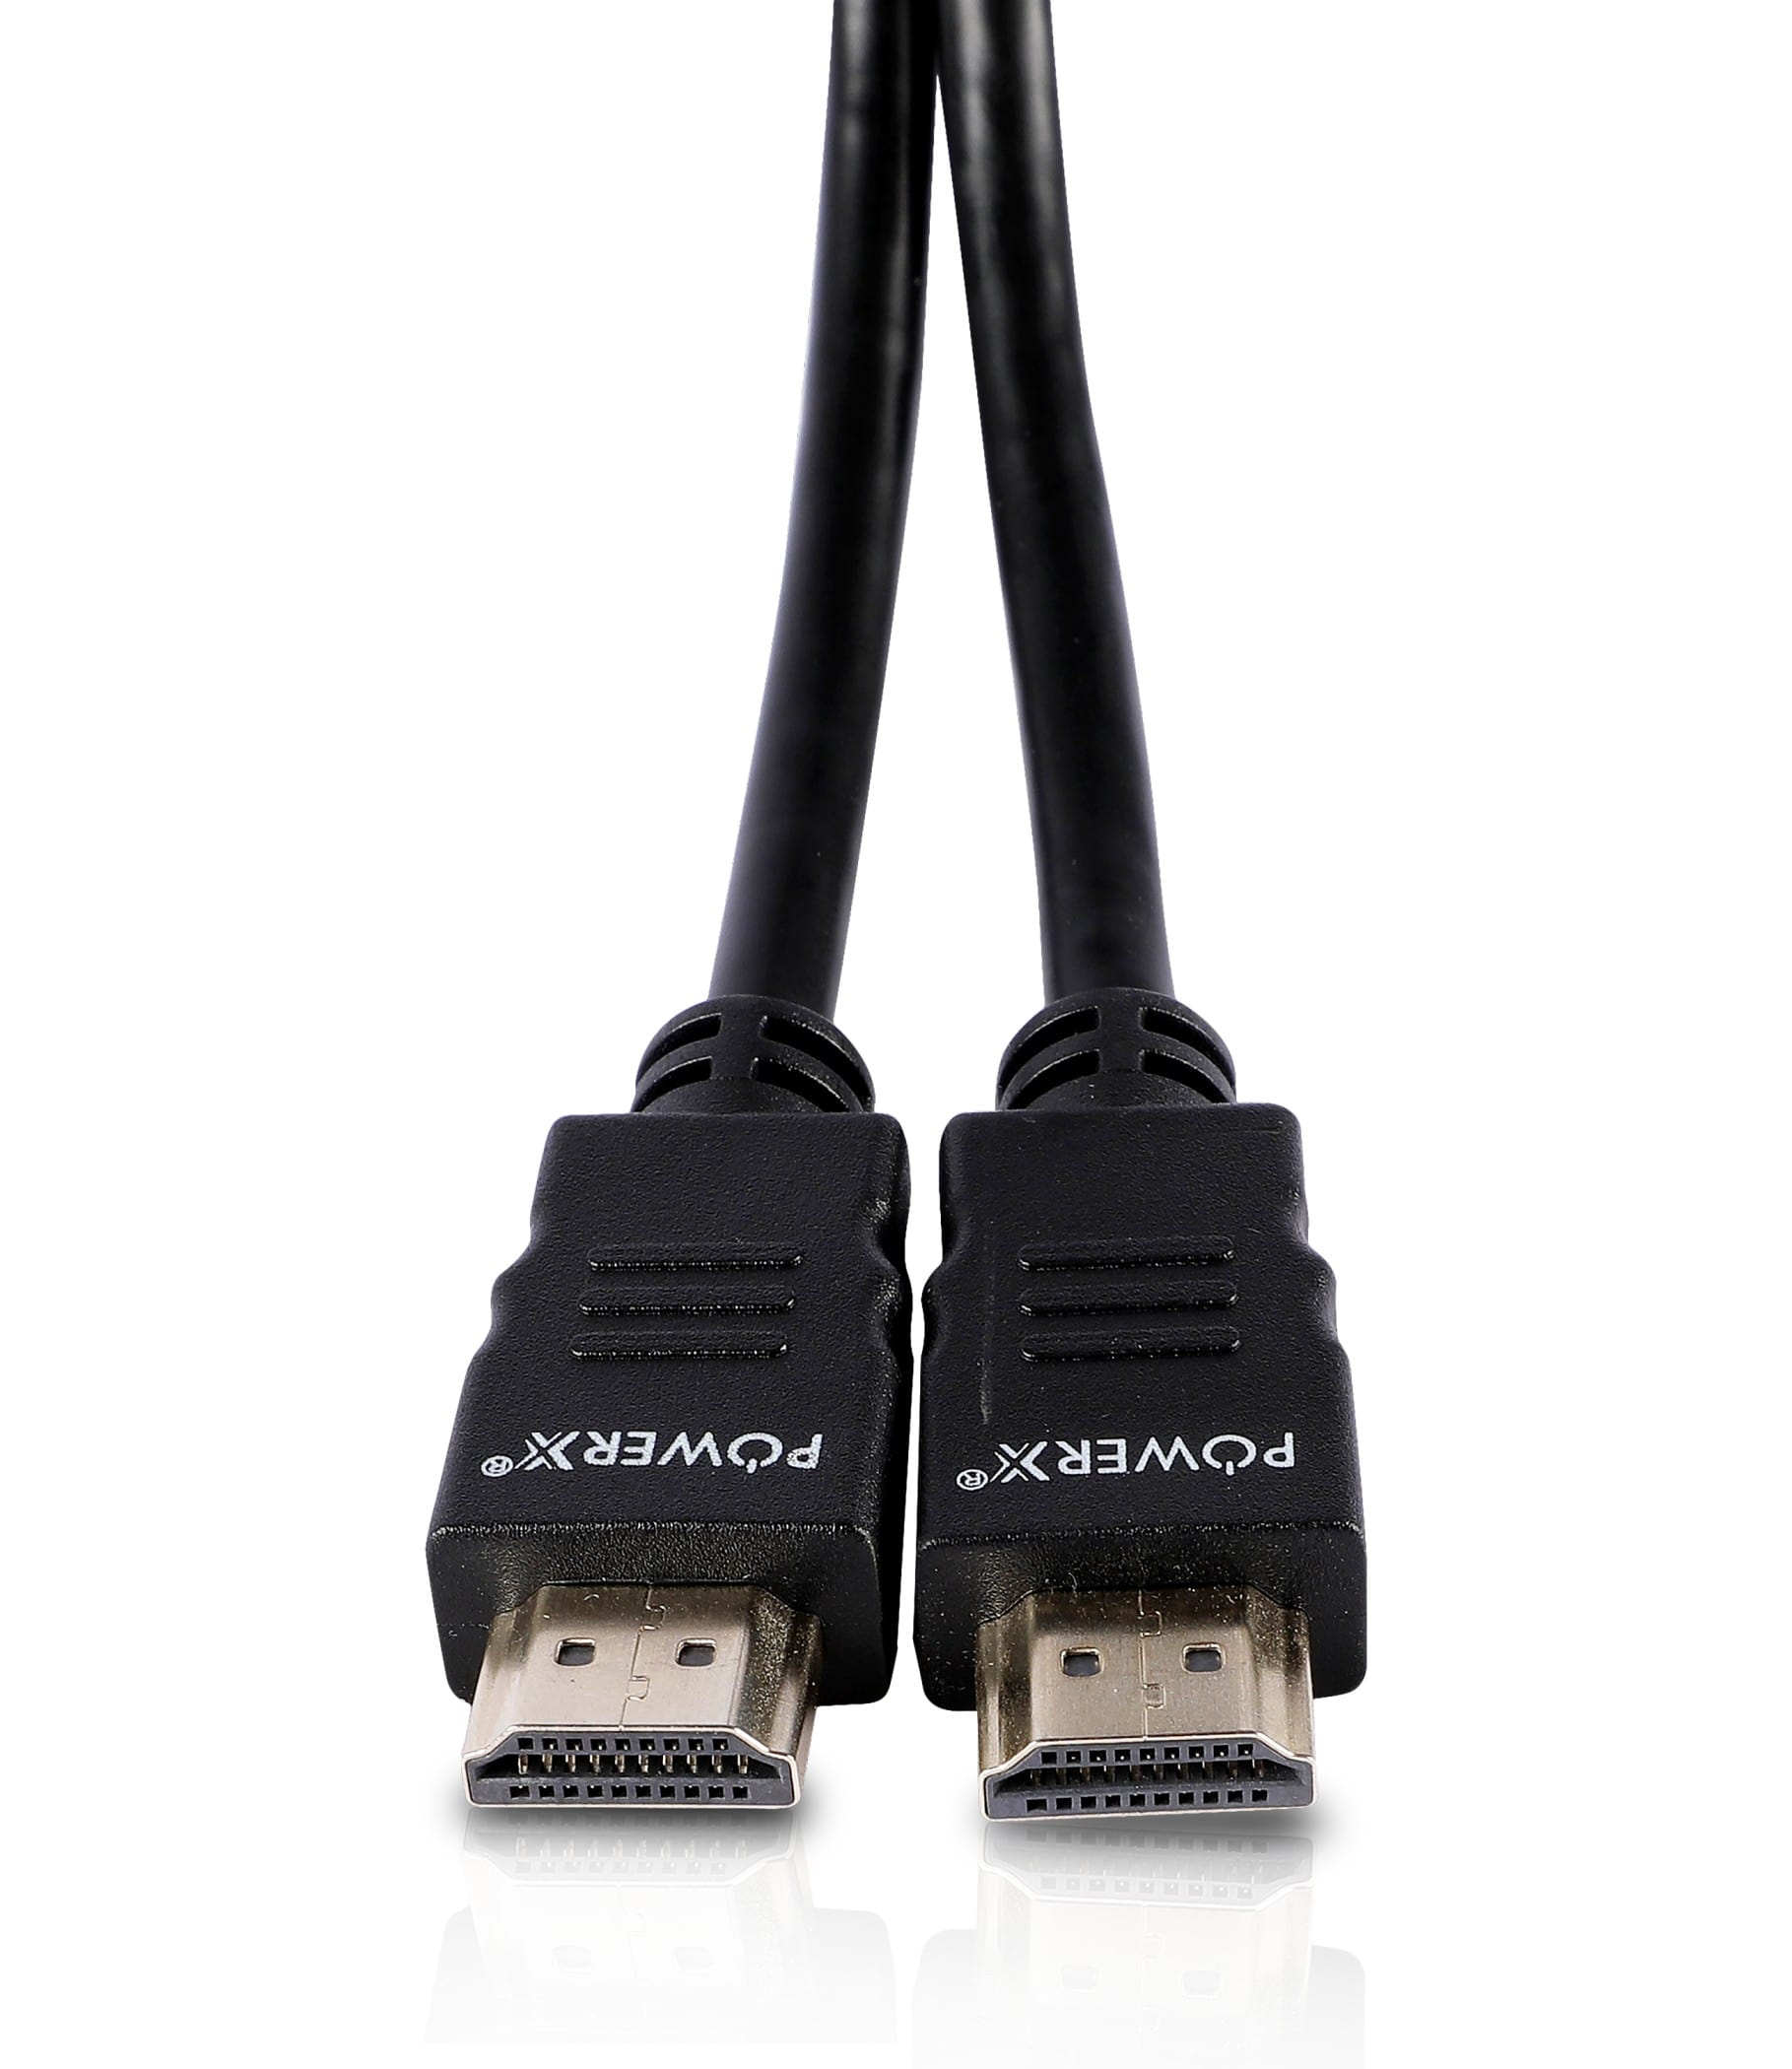 HDMI TO HDMI CABLE 1.8 METER